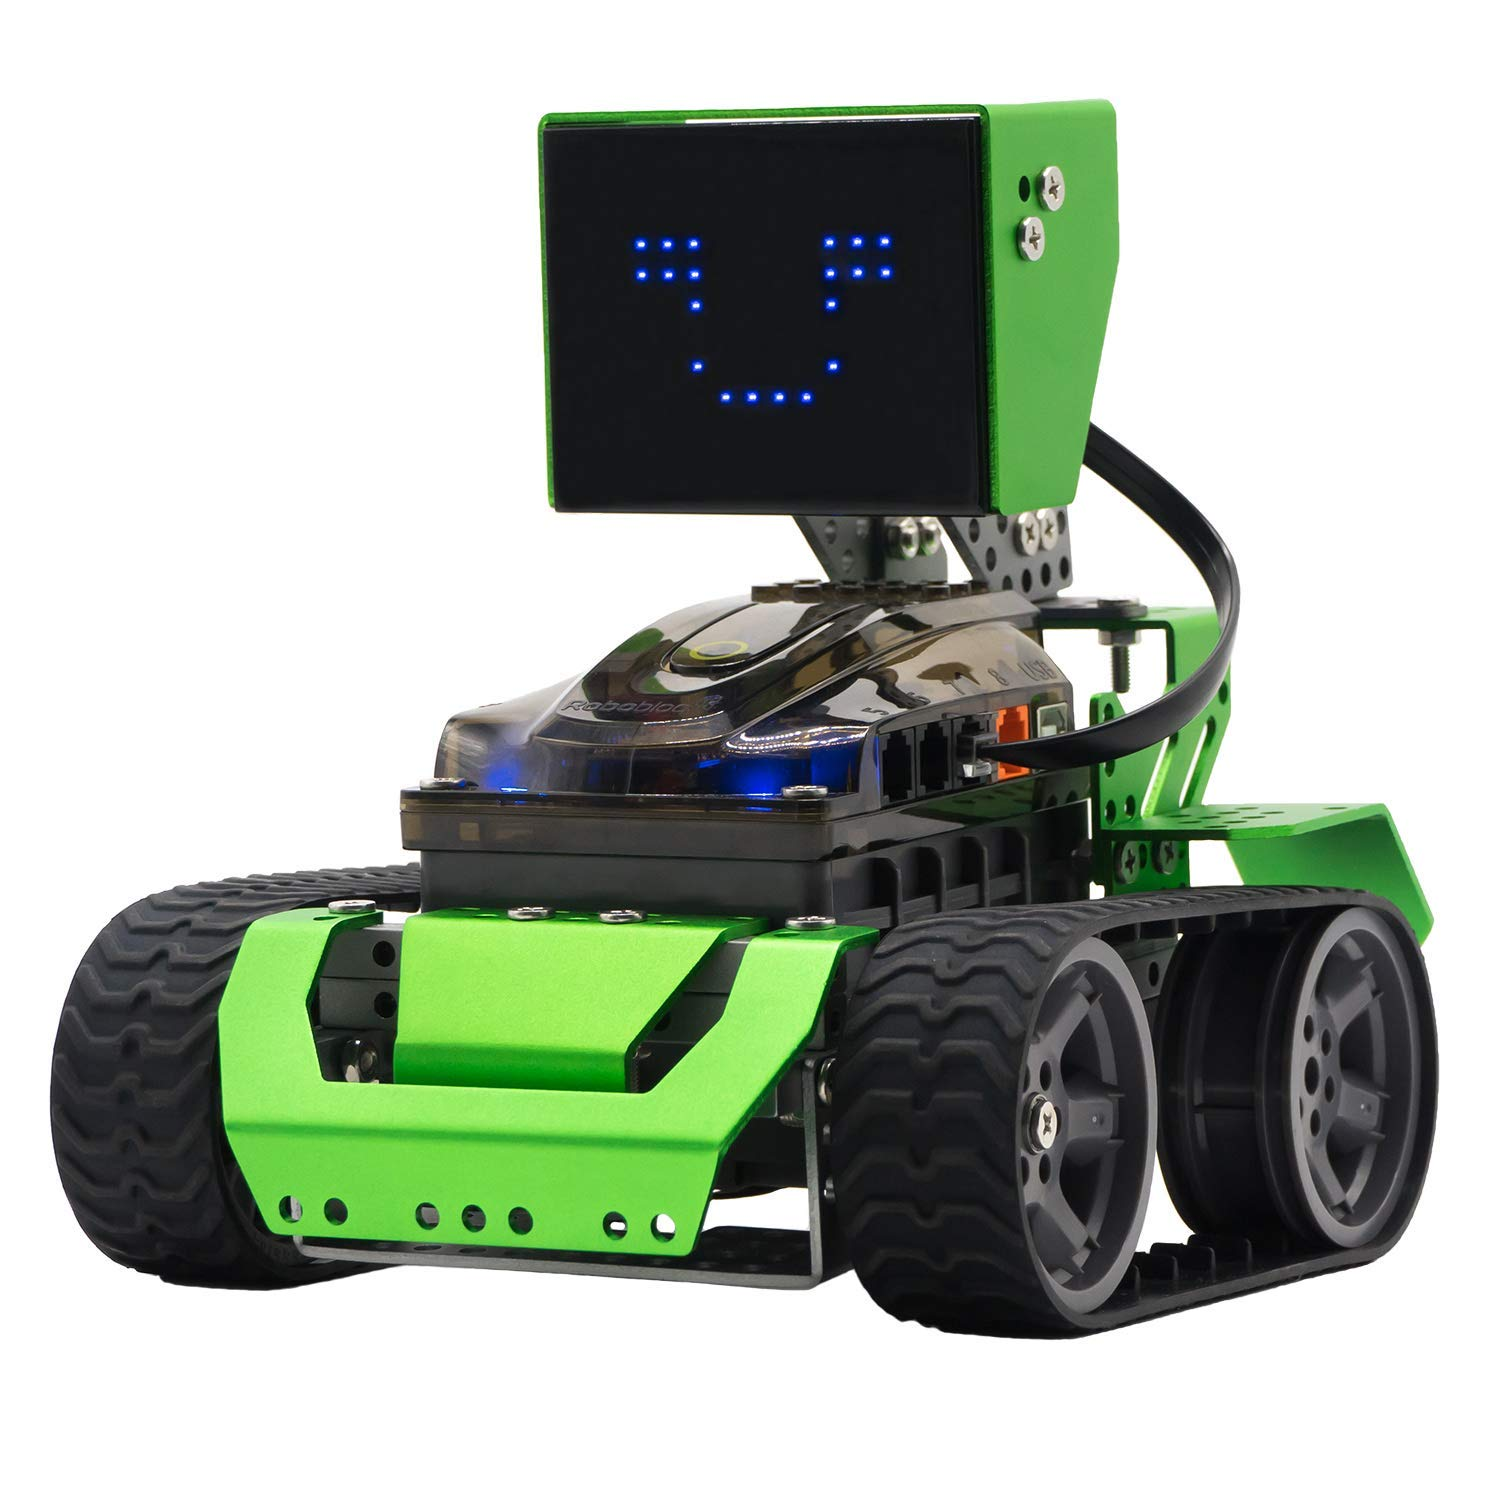 Robots are cool, but robots your can build yourself are even cooler.<br><br>Learn a thing or two while you make a new friend with a robot kit <a href="https://amzn.to/2QAm7wu" "nofollow" target="_blank">here</a>.